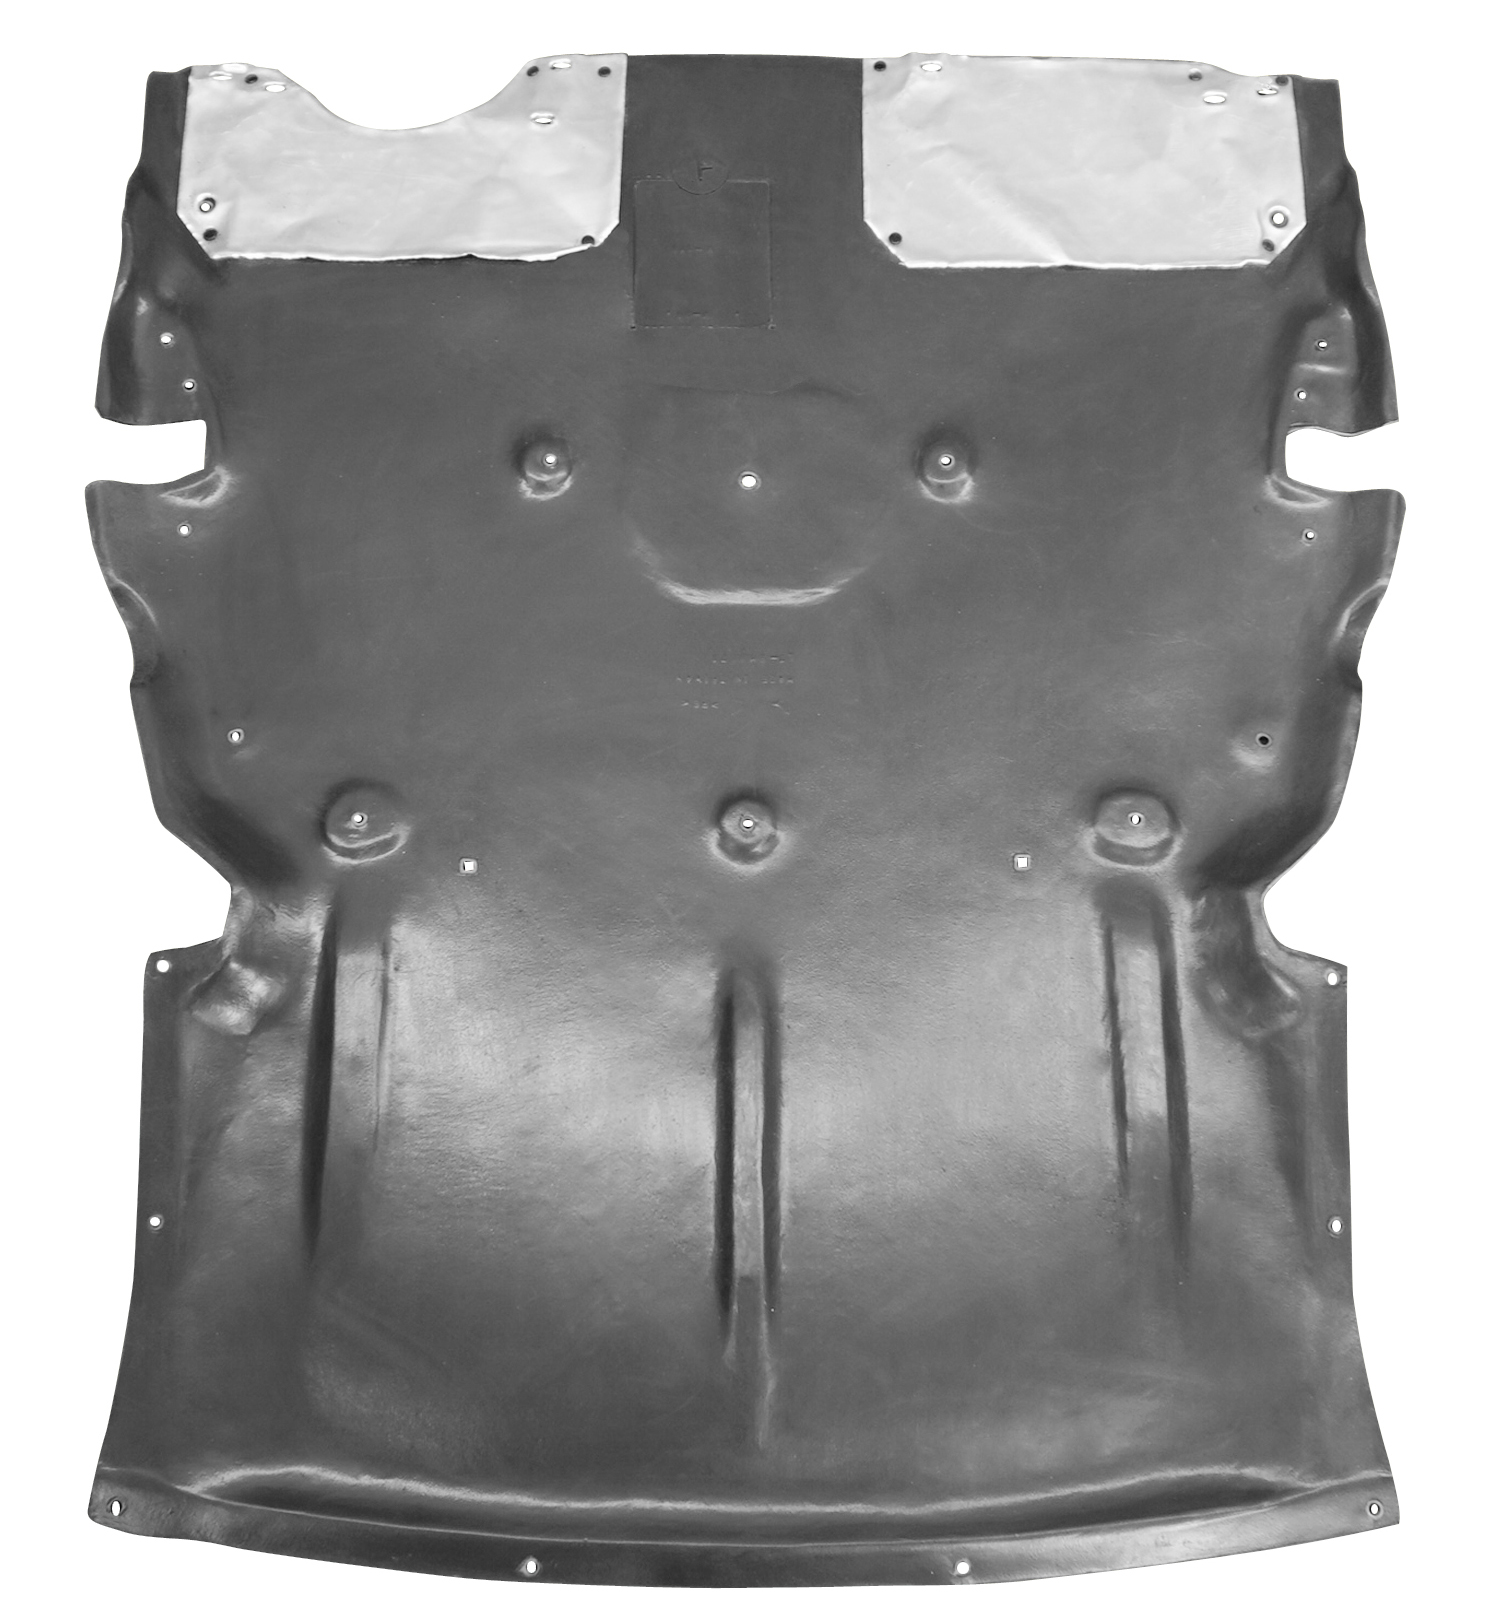 Aftermarket UNDER ENGINE COVERS for BMW - 320I, 320i,12-18,Lower engine cover